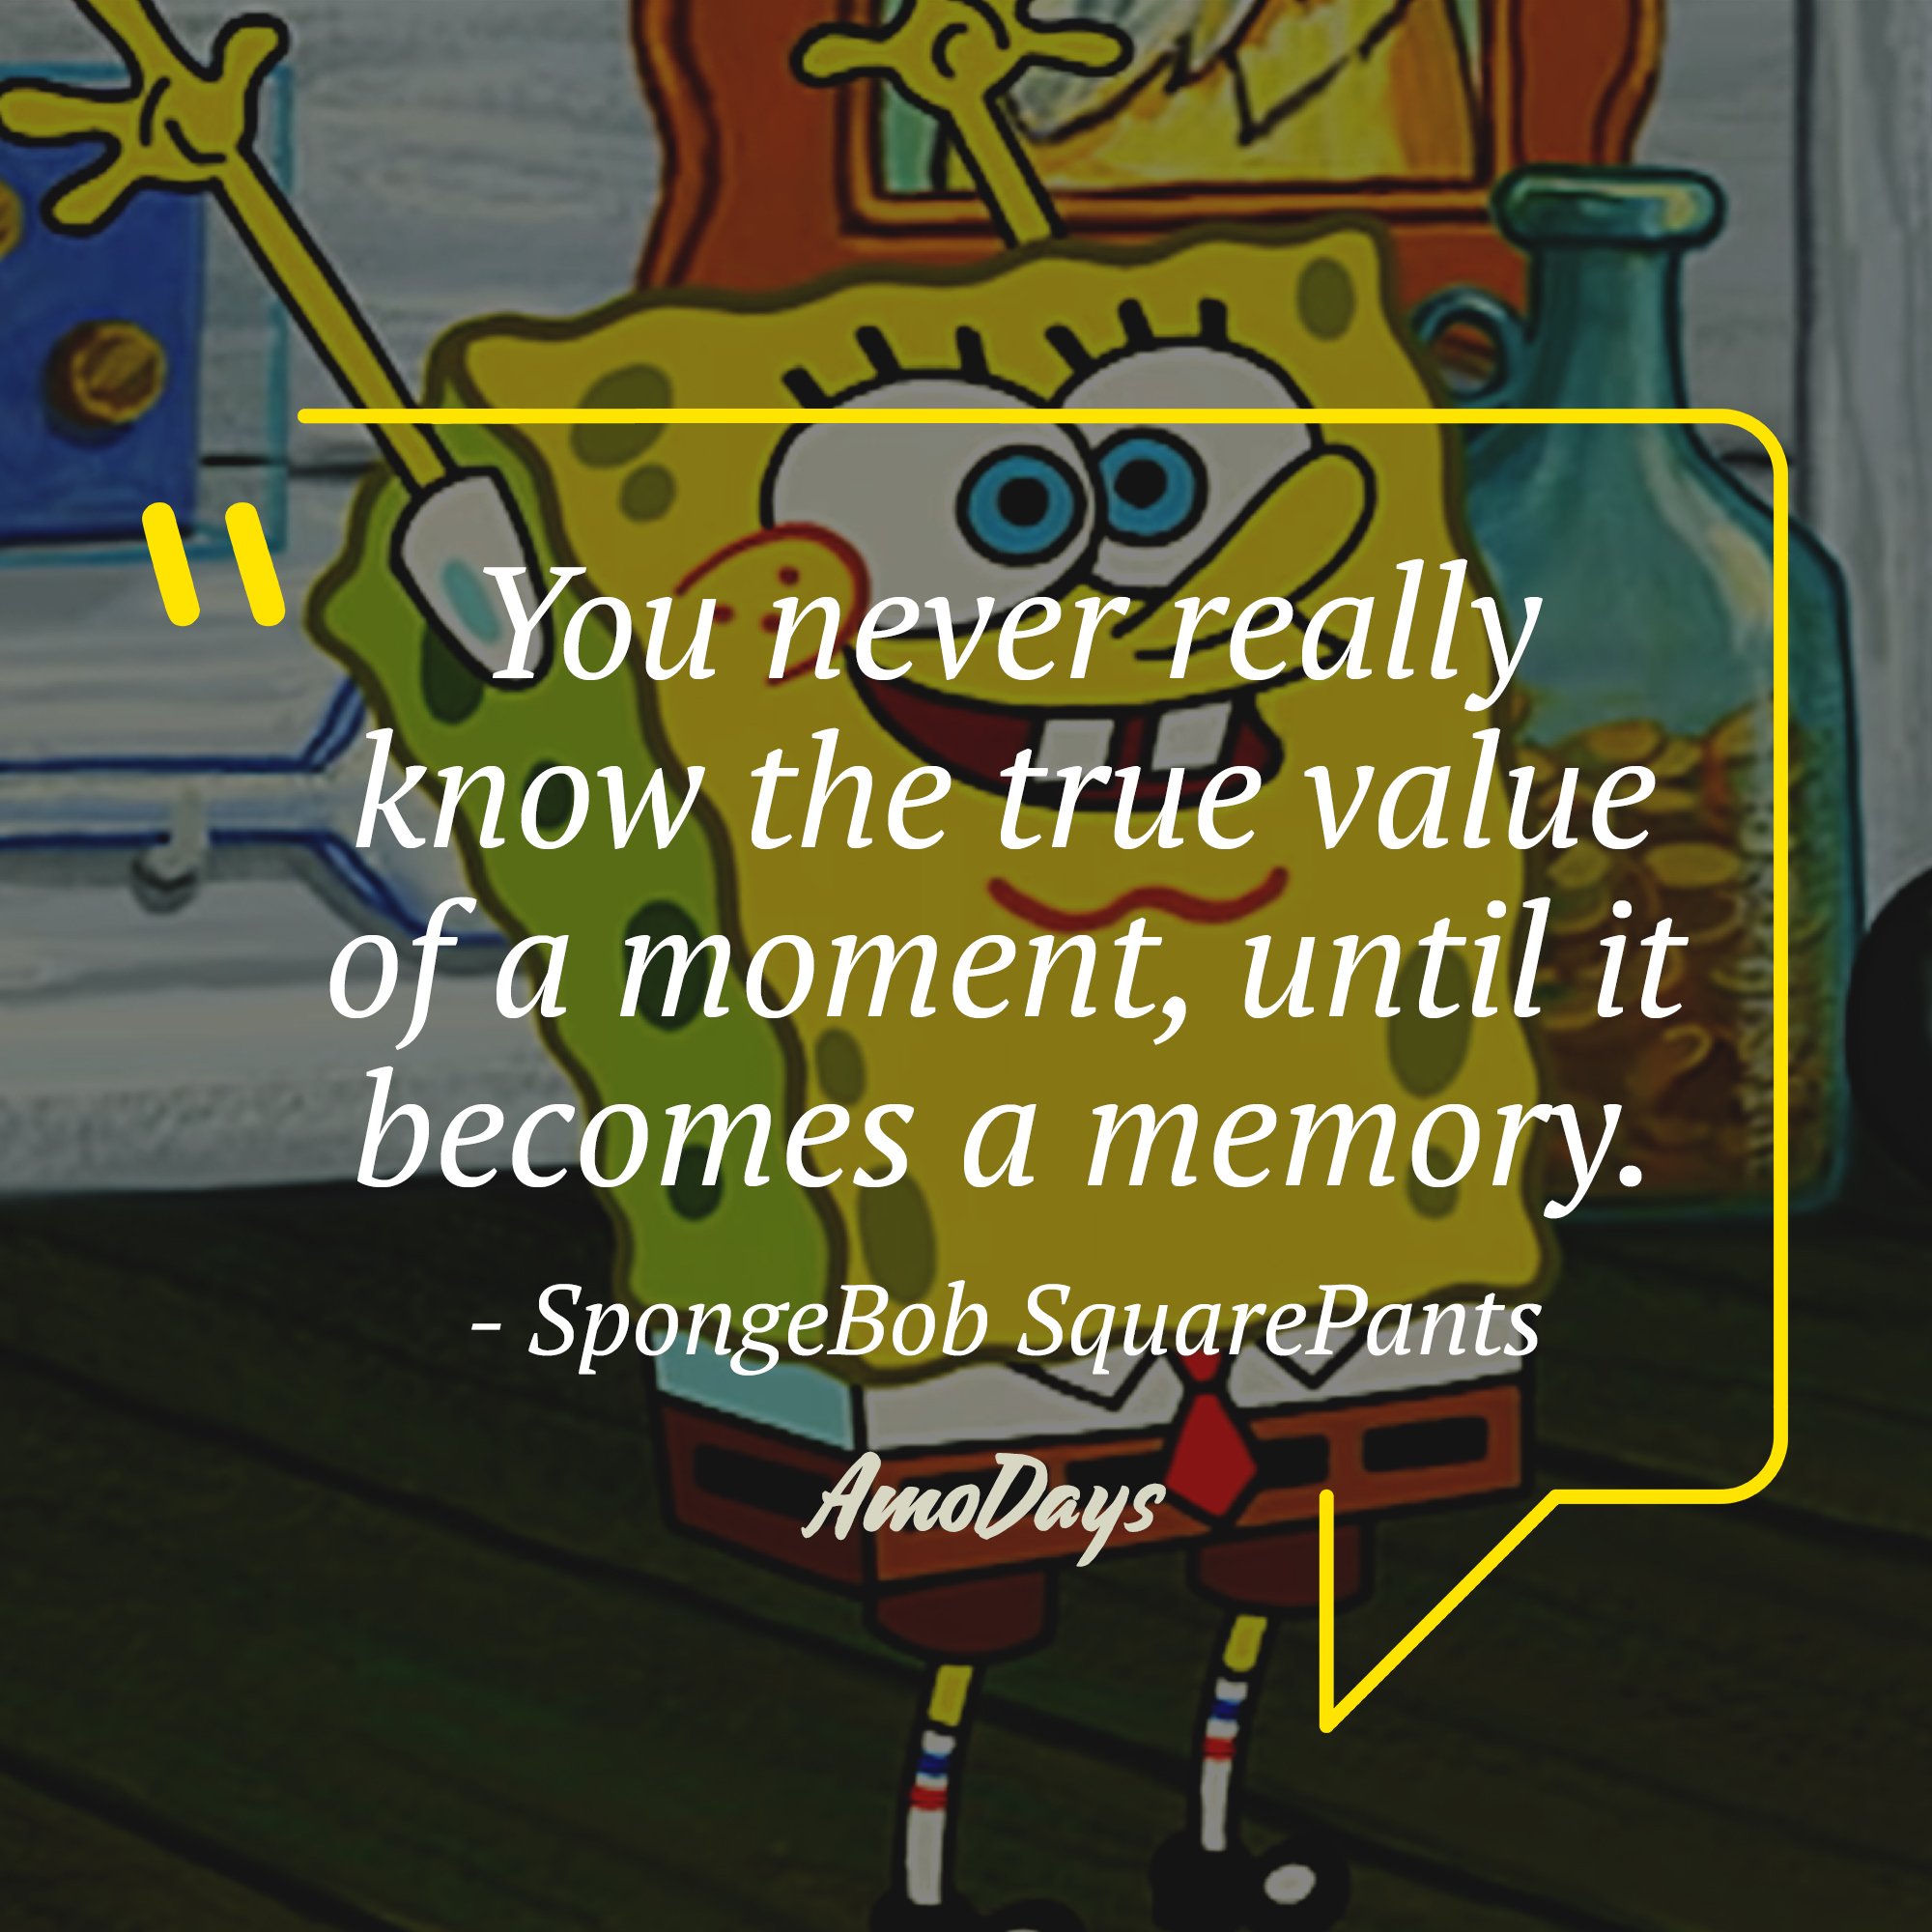 SpongeBob SquarePants's quote: “You never really know the true value of a moment, until it becomes a memory.” | Image: AmoDays